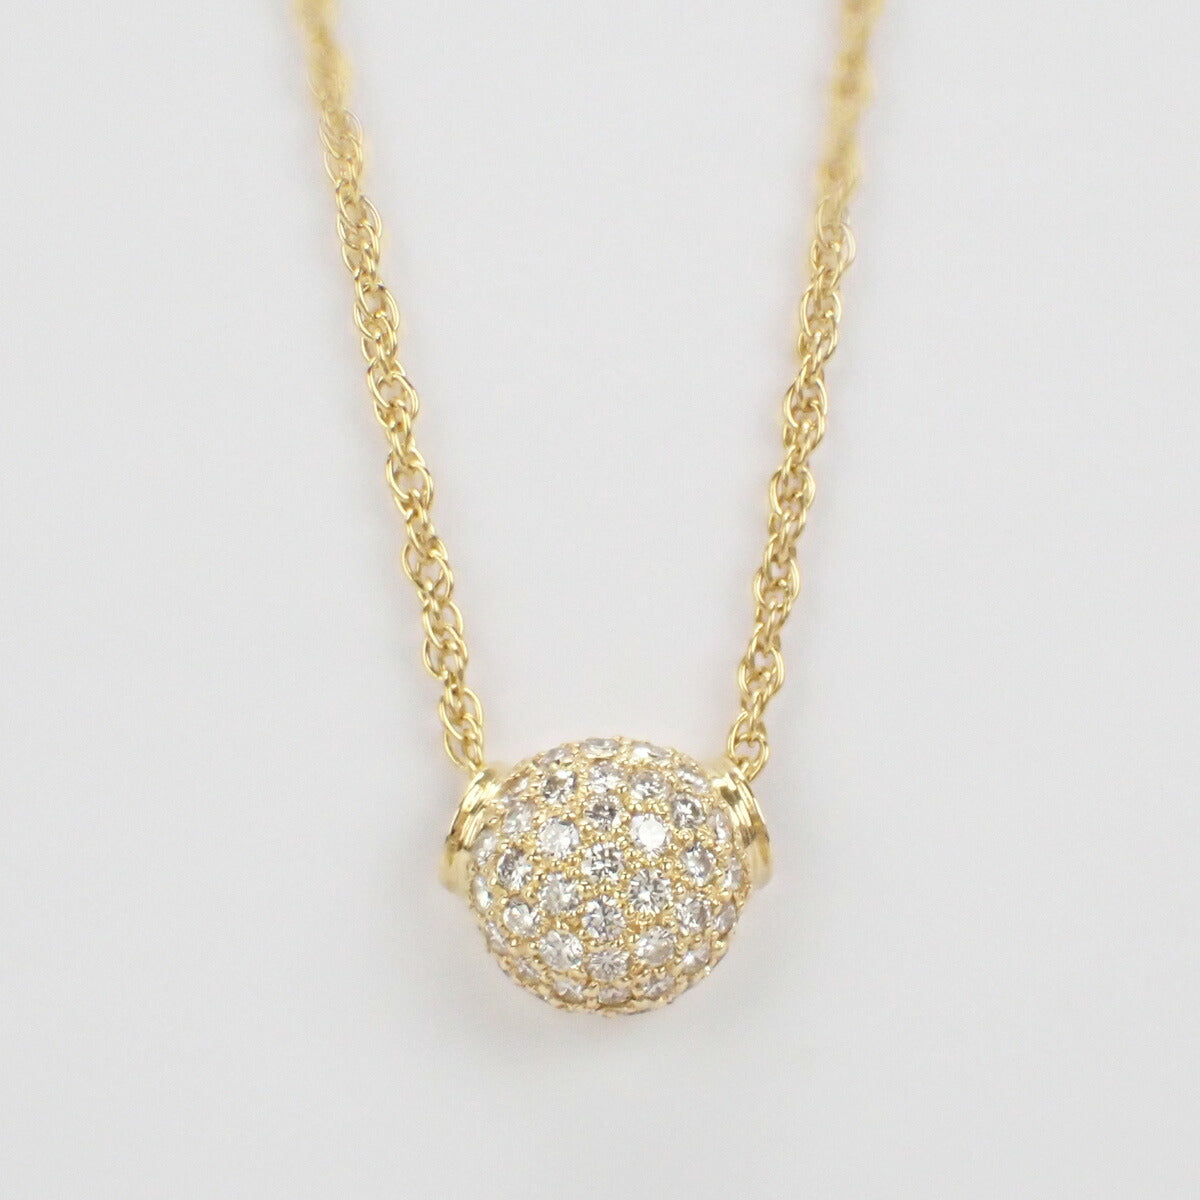 K18YG Ball Motif Diamond Necklace 0.67ct, Yellow Gold Finish, Ladies (Pre-owned)